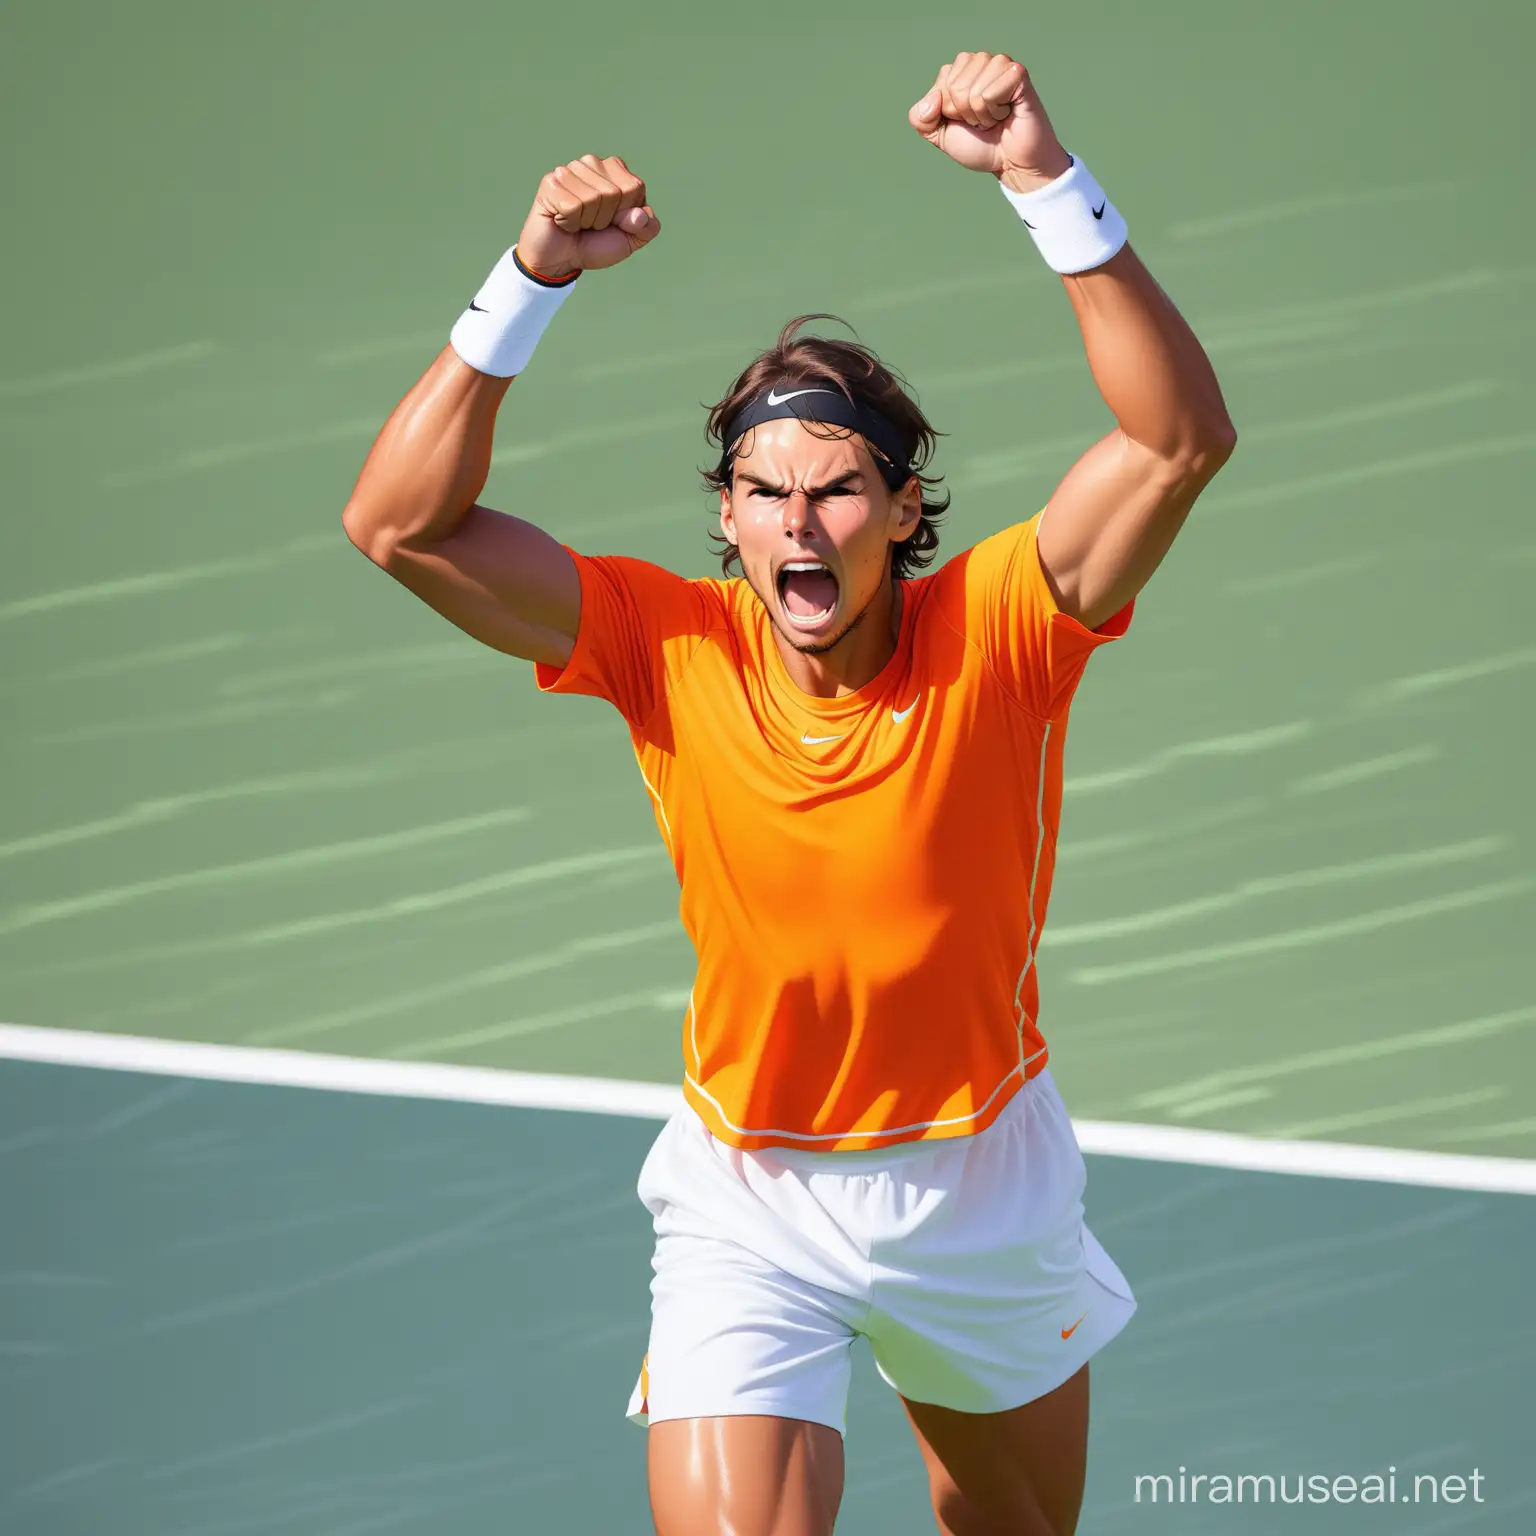 Rafael Nadal Triumphantly Raises Fist in Tearful Victory on Tennis Court